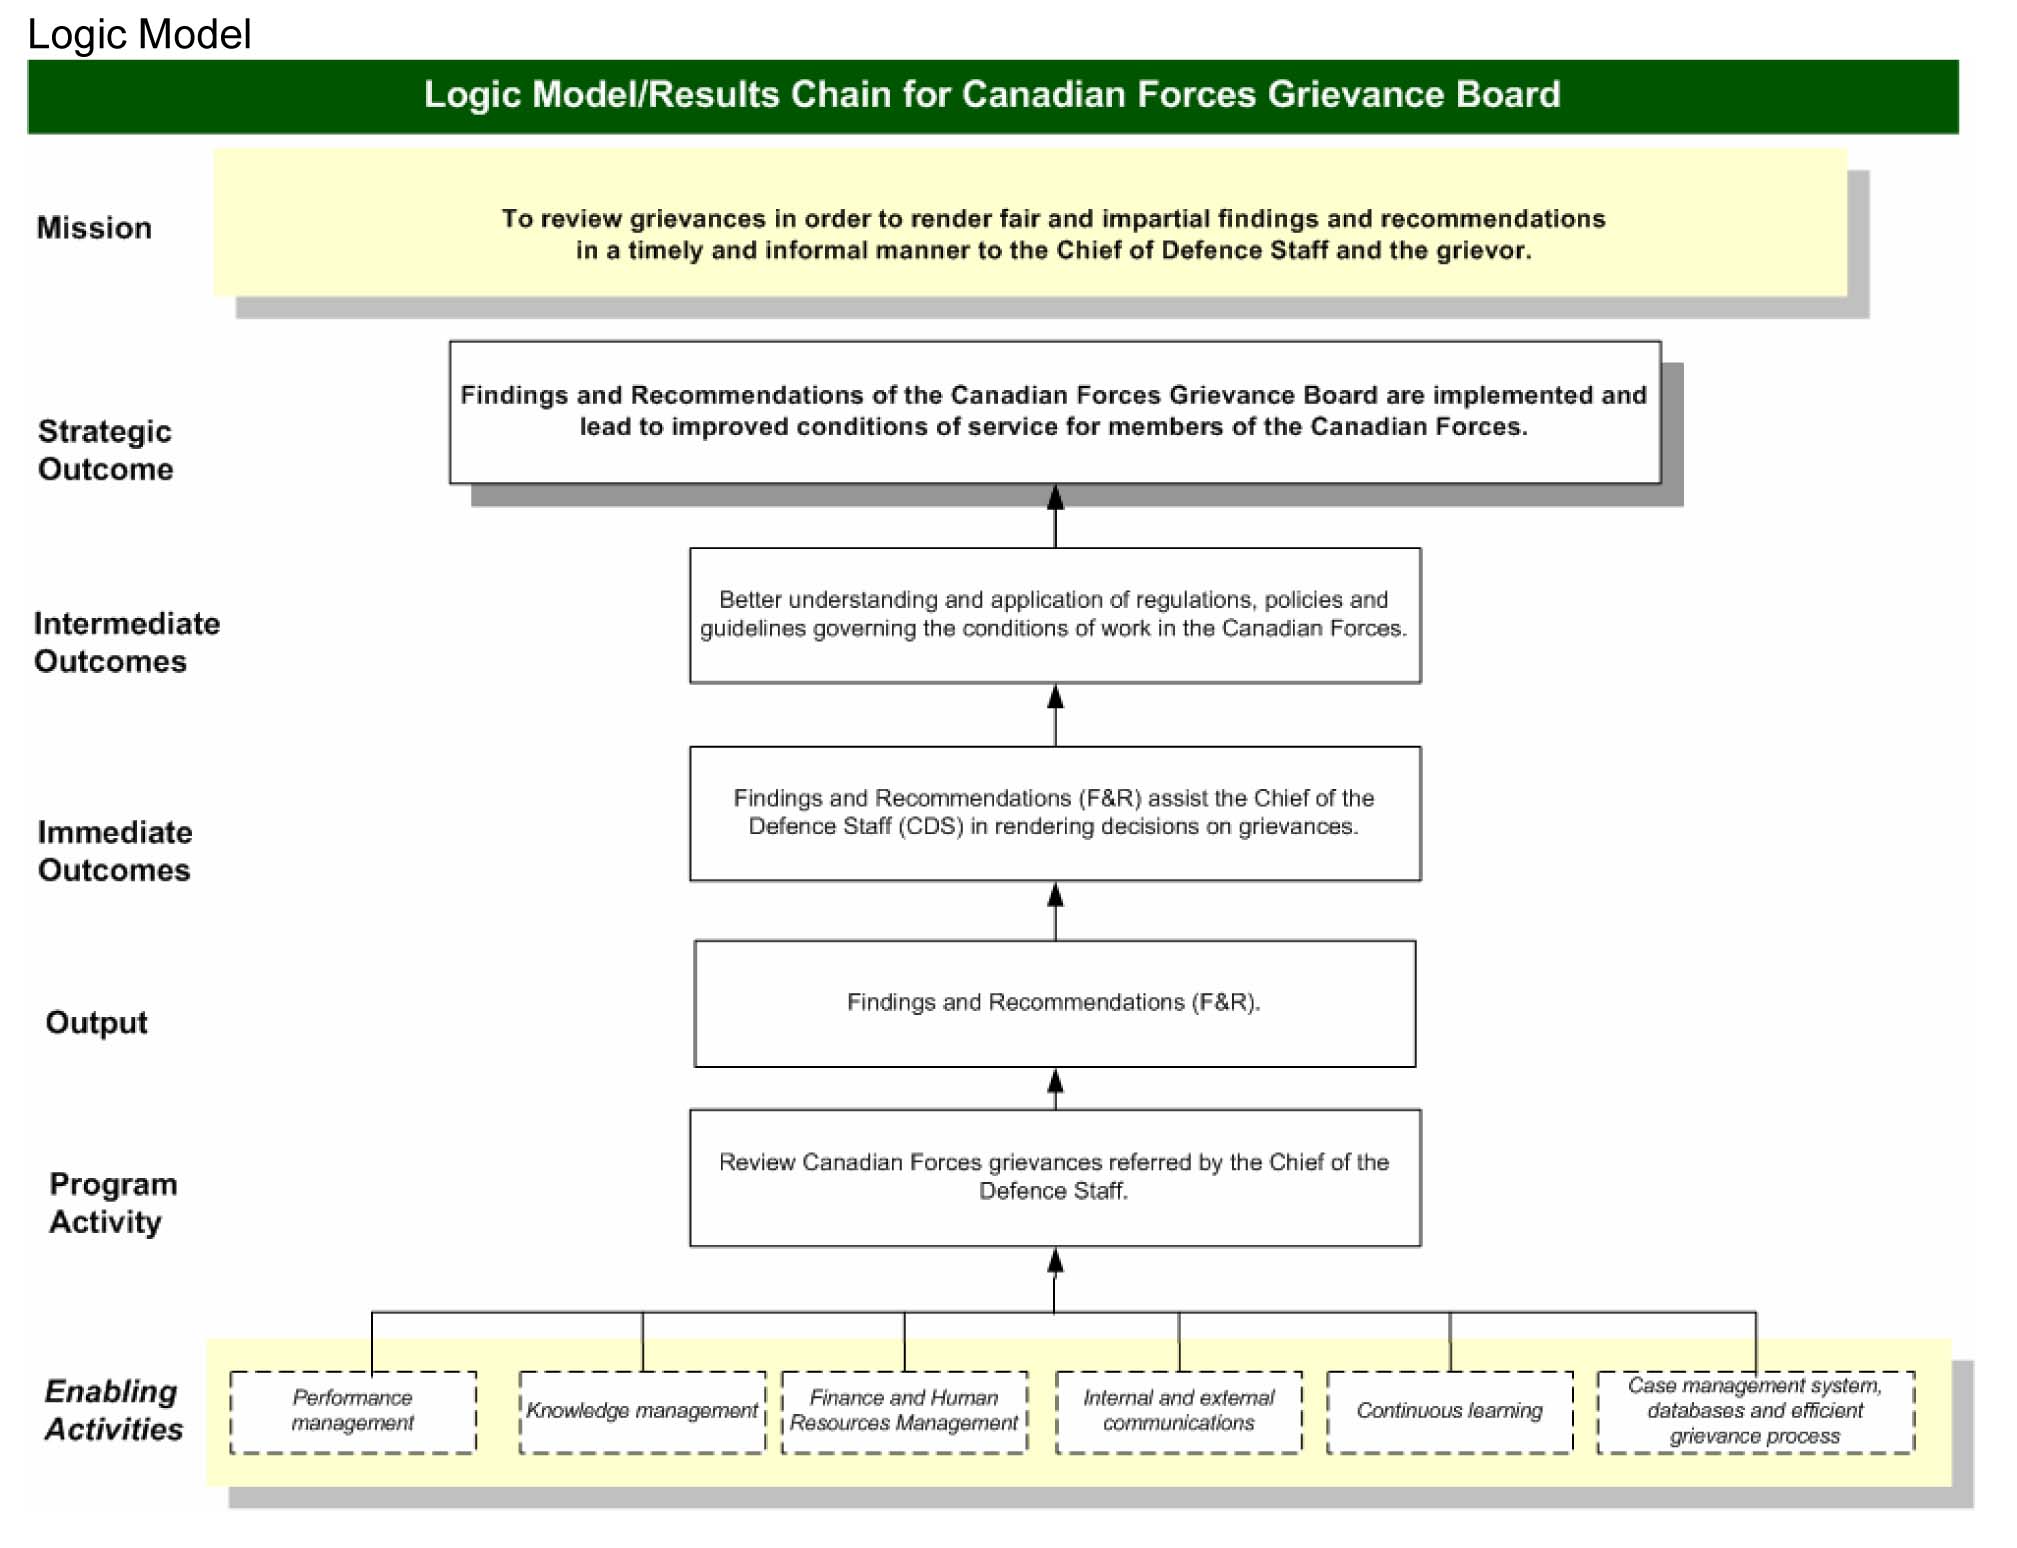 Logic Model/Results Chain for Canadian Forces Grievance Board